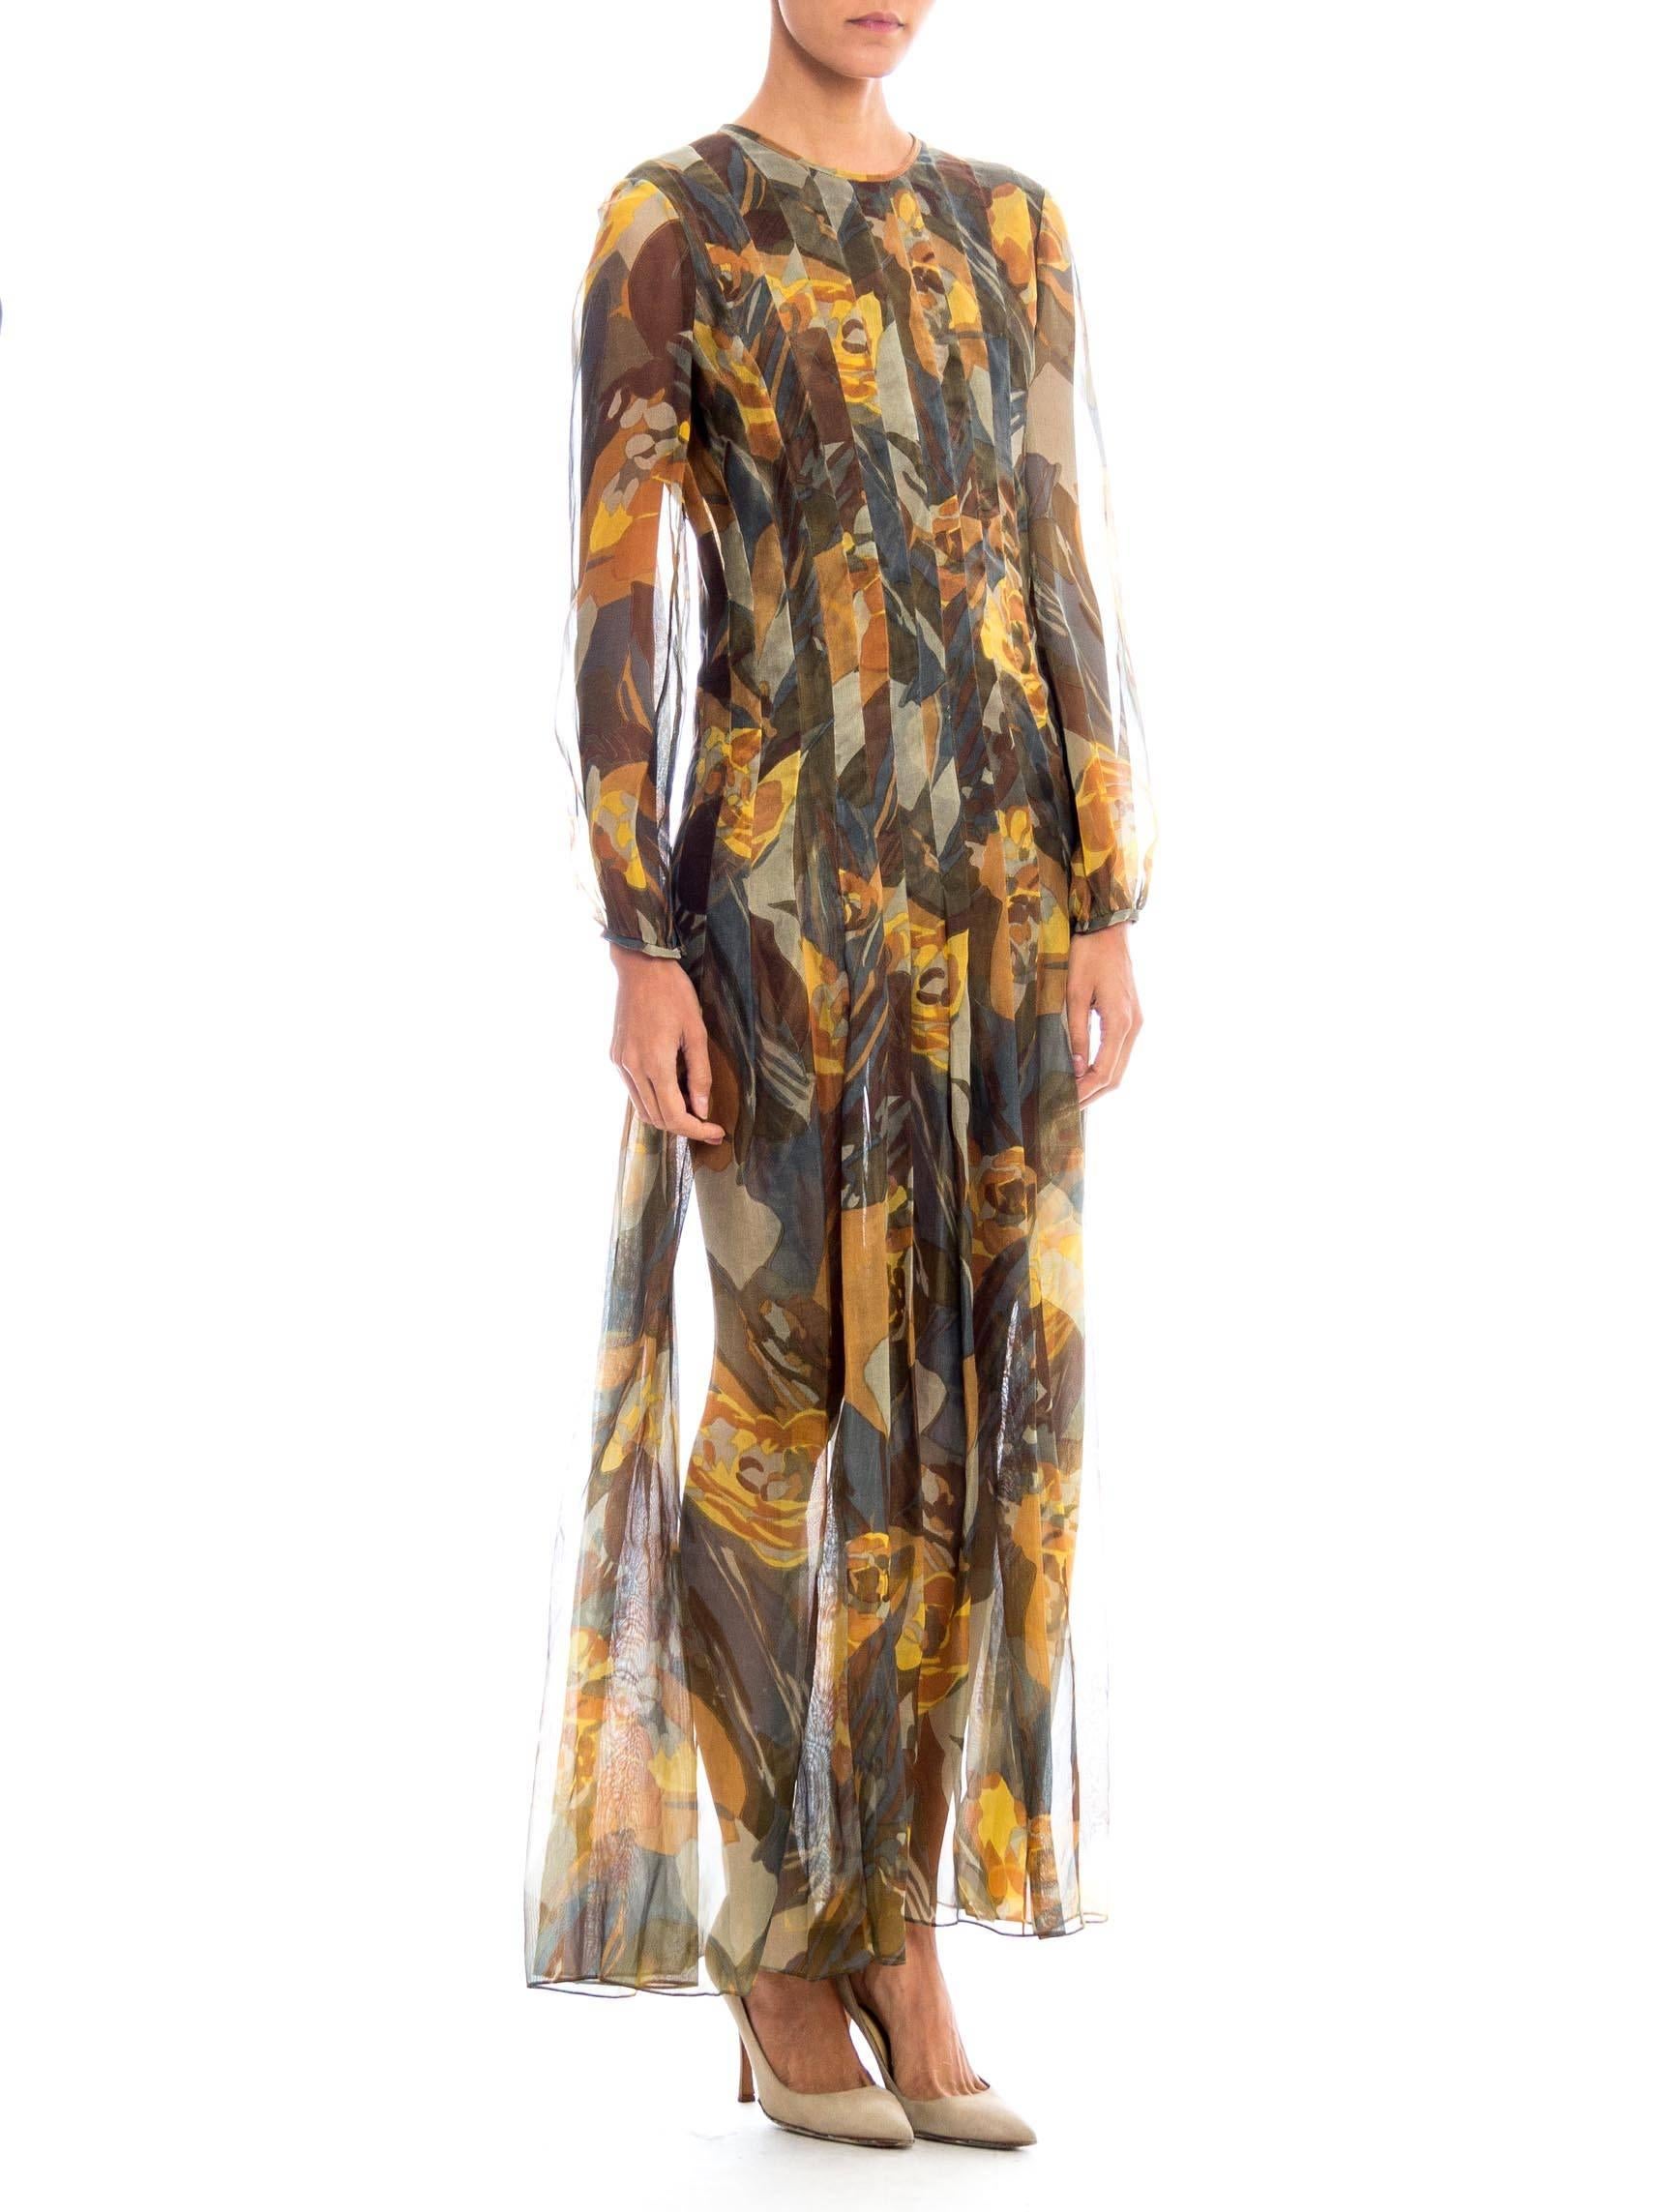 We believe this beautiful dress from Pauline Trigere has had the lining removed and may have been altered. Regardless it is a gorgeous dress in an abstracted floral print rendered in earth tones. The dress is cut wide but then has been pleated down